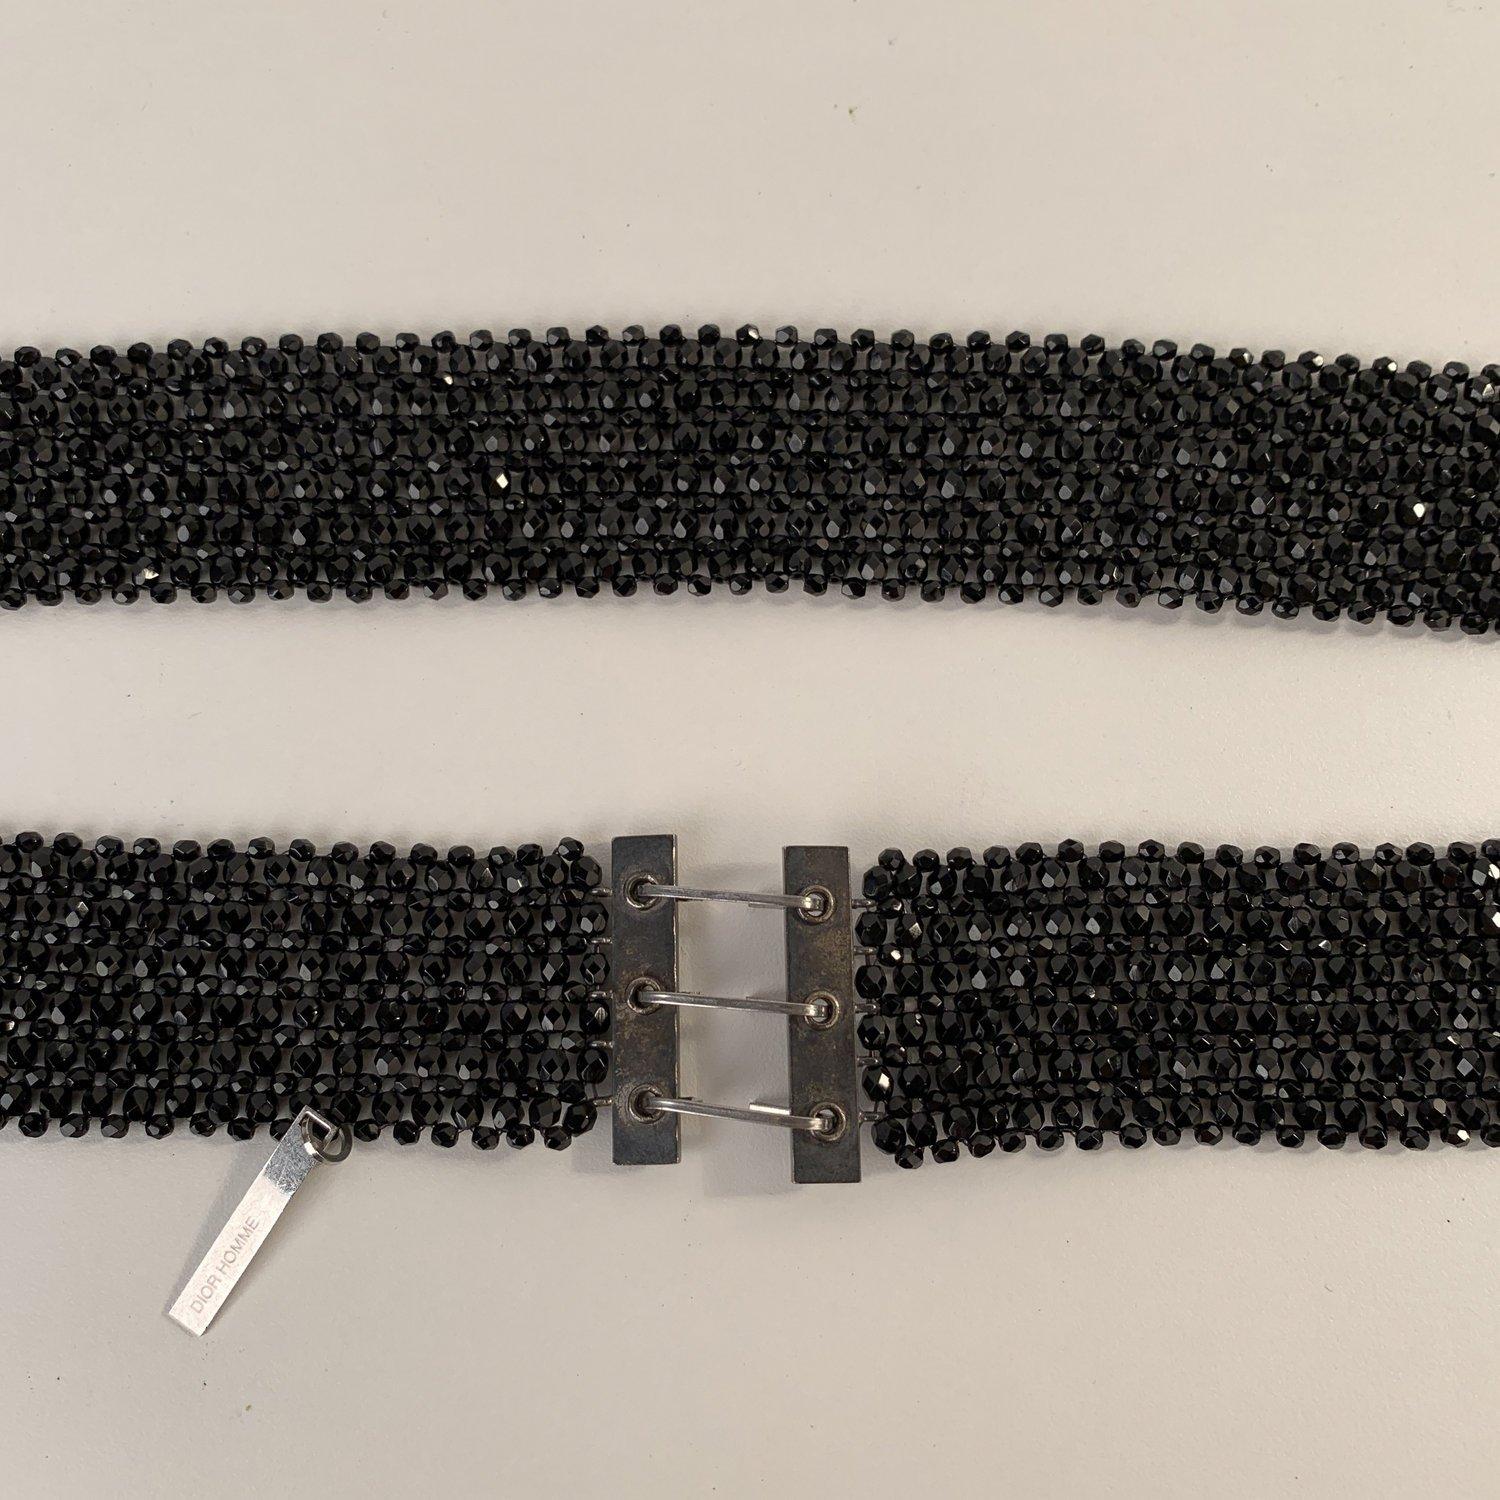 MATERIAL: Beads COLOR: Black MODEL: Beaded Belt GENDER: Men SIZE: N/A Condition A :EXCELLENT CONDITION - Used once or twice. Looks mint. Imperceptible signs of wear may be present due to storage Measurements BELT WIDTH: Medium TOTAL LENGTH: Total